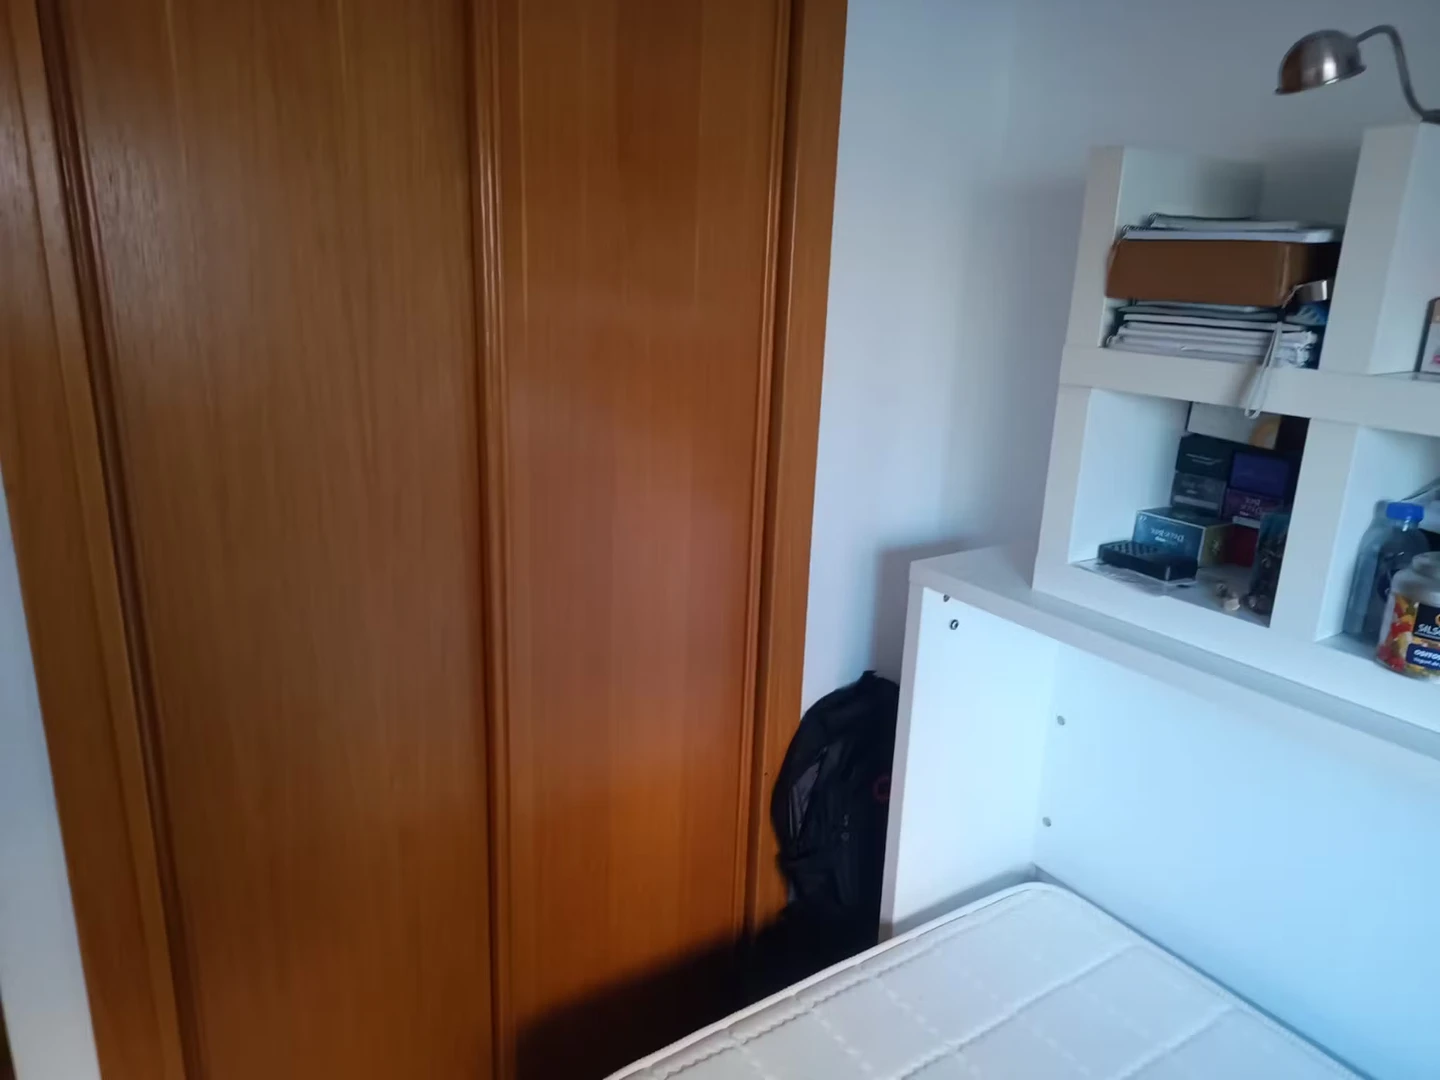 Room for rent in a shared flat in Boadilla Del Monte